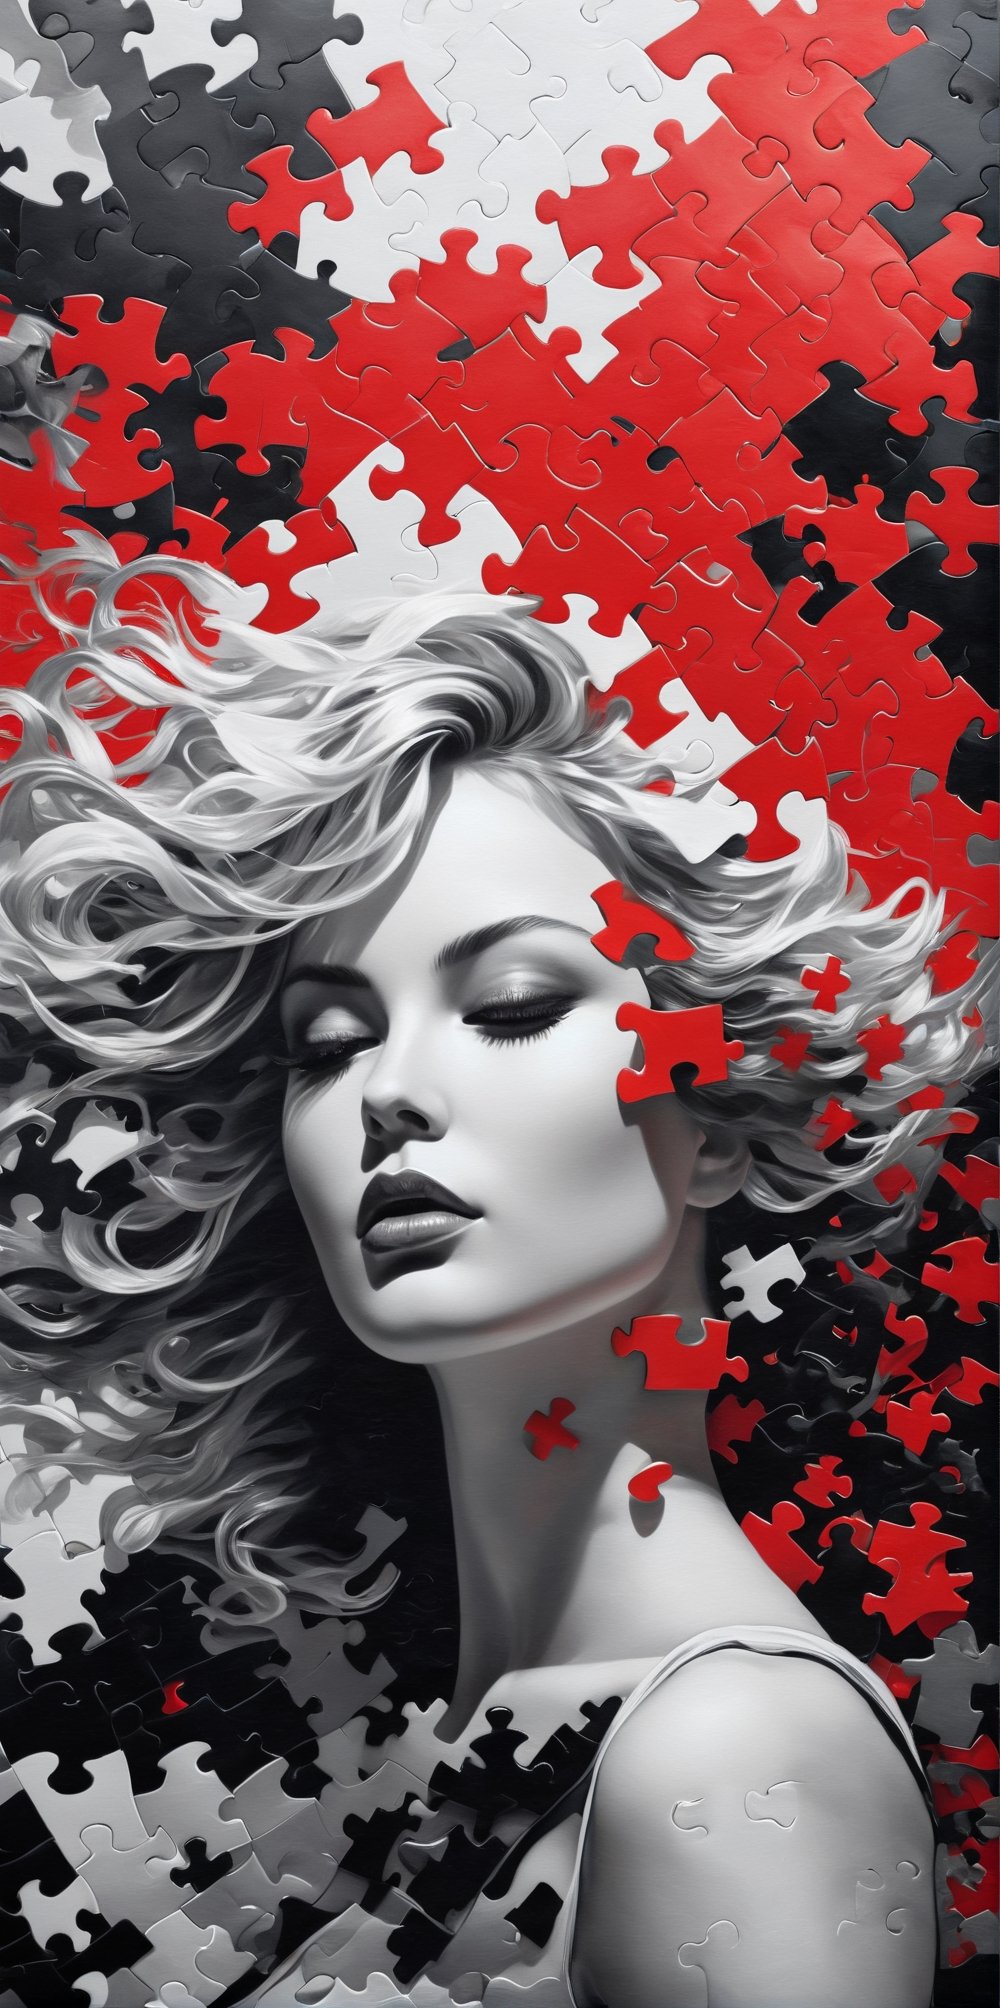 8k quality hiperrealistic, (((A long exposed and degrated photo imatge))) of a stunningly digital work drawed with black, white and red colors pencils of a puzzle pieces pattern silhouette of a hiperrealistic and detailed woman , 3d render, illustration, paintingv0.1, painting, illustration, poster